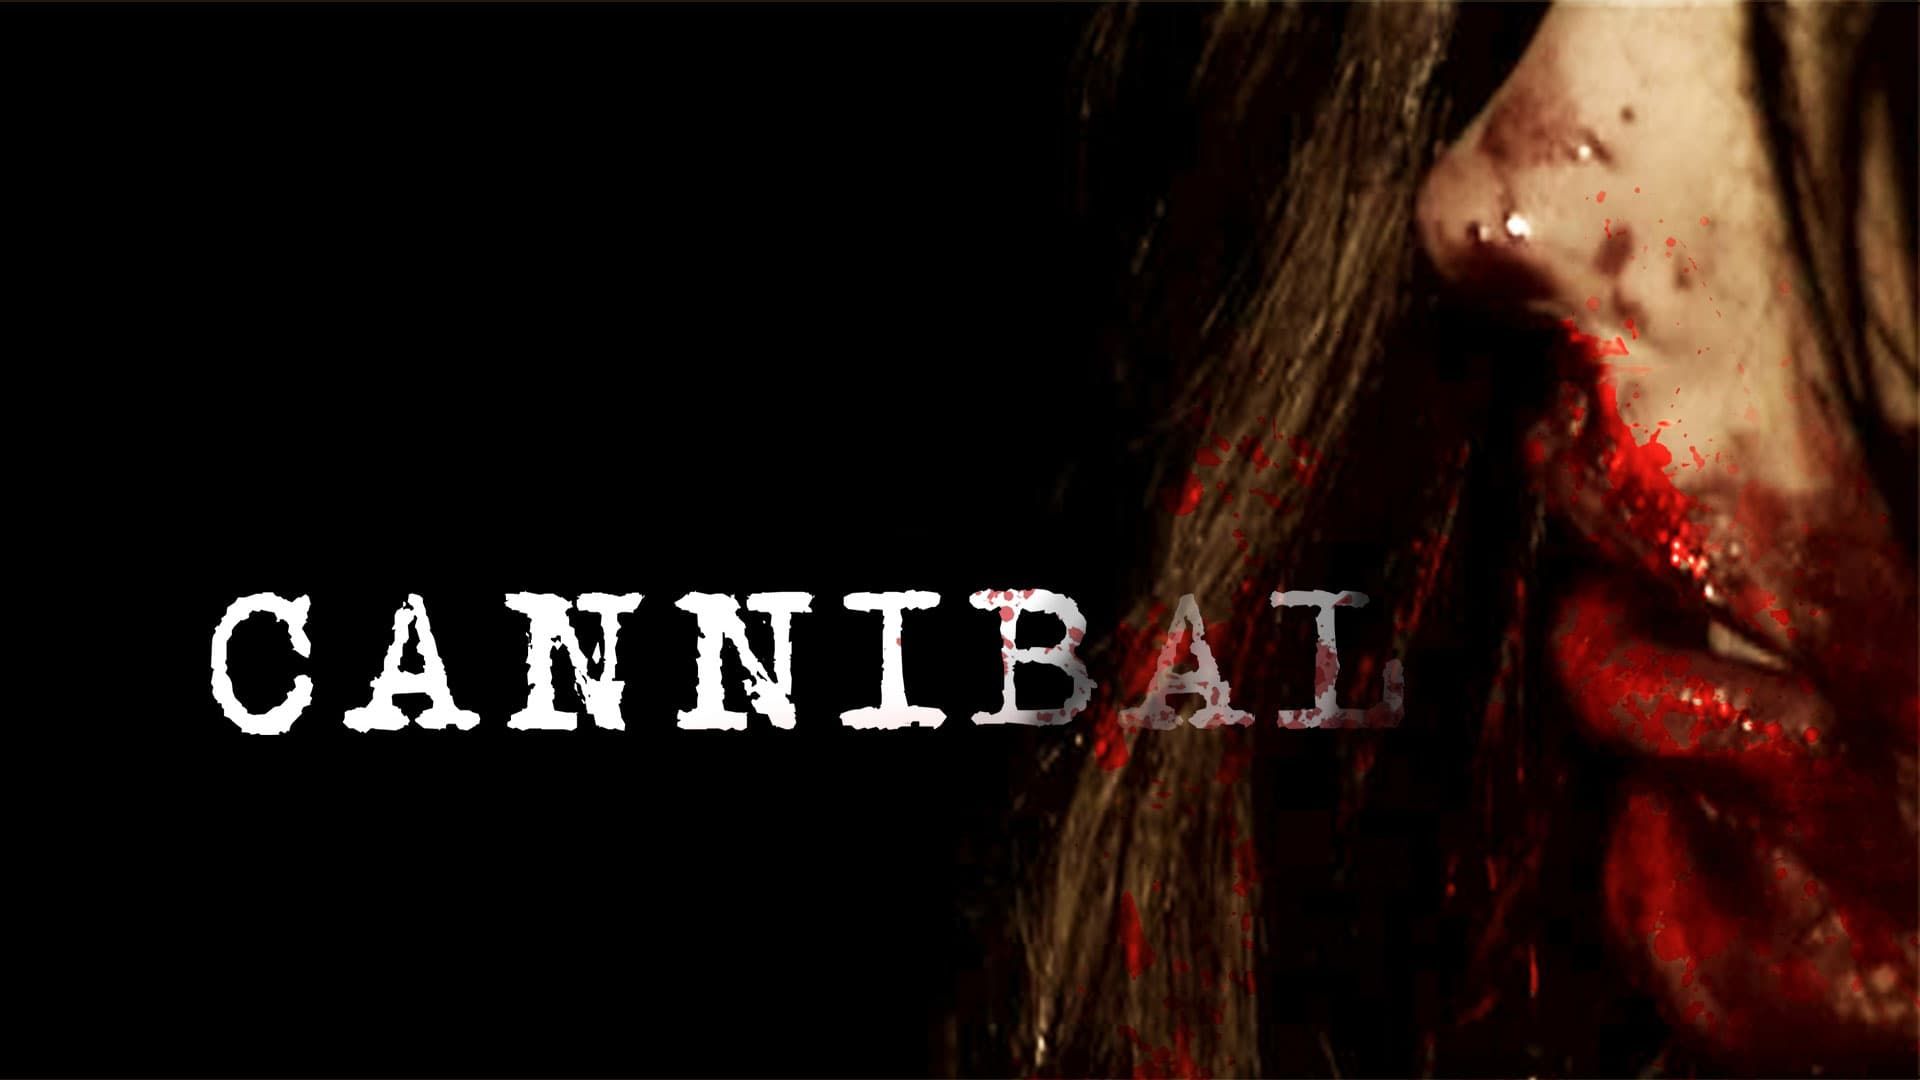 Cannibal background